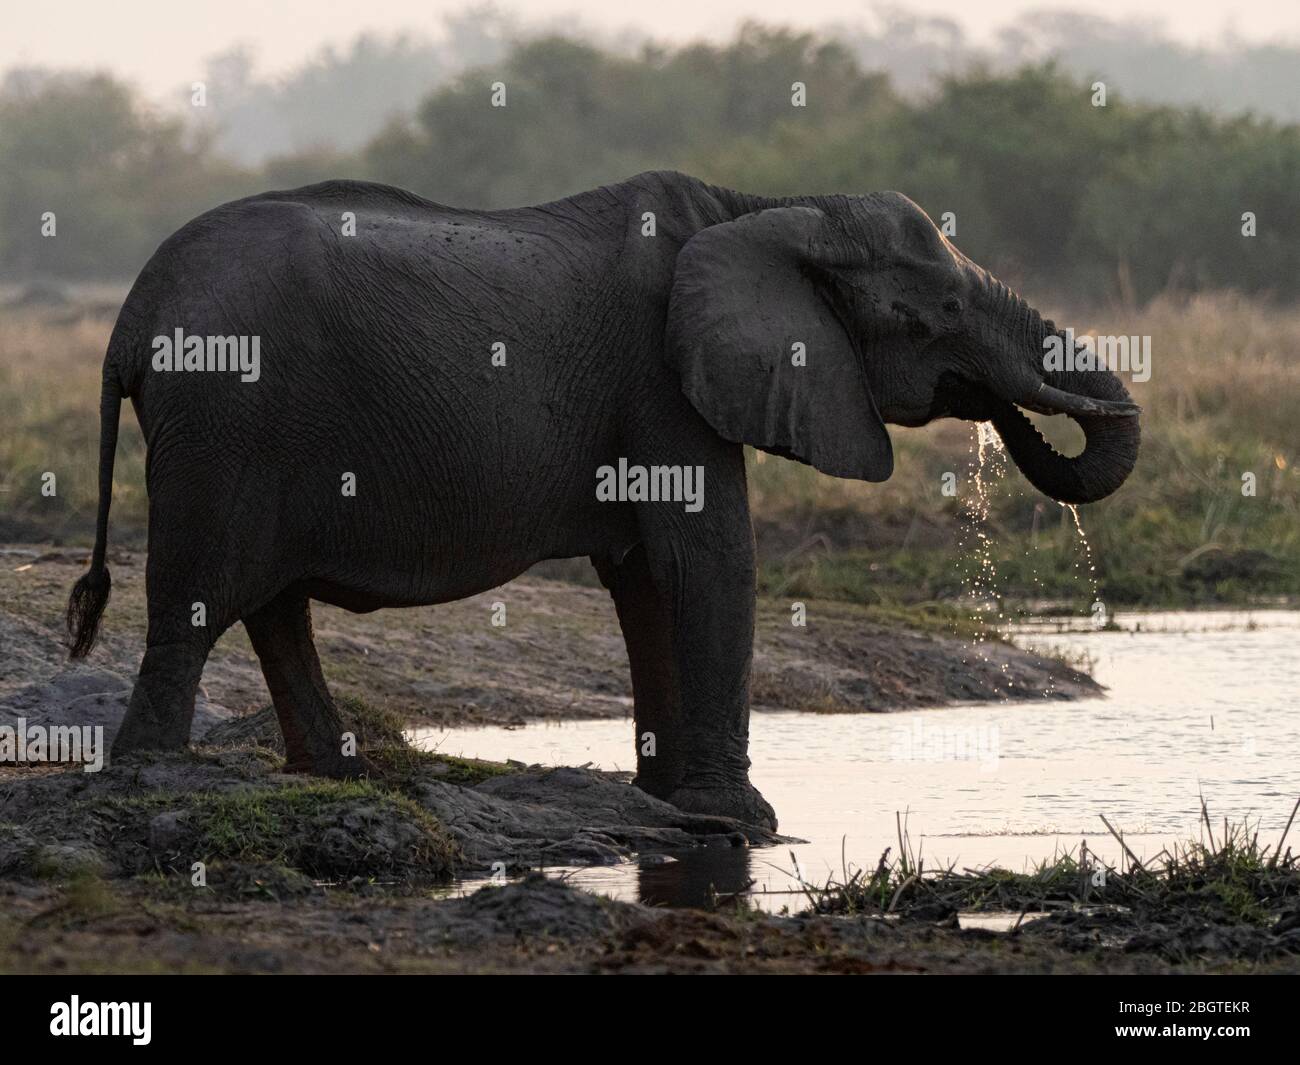 An adult African elephant, Loxodonta africana, drinking water in Chobe National Park, Botswana, South Africa. Stock Photo